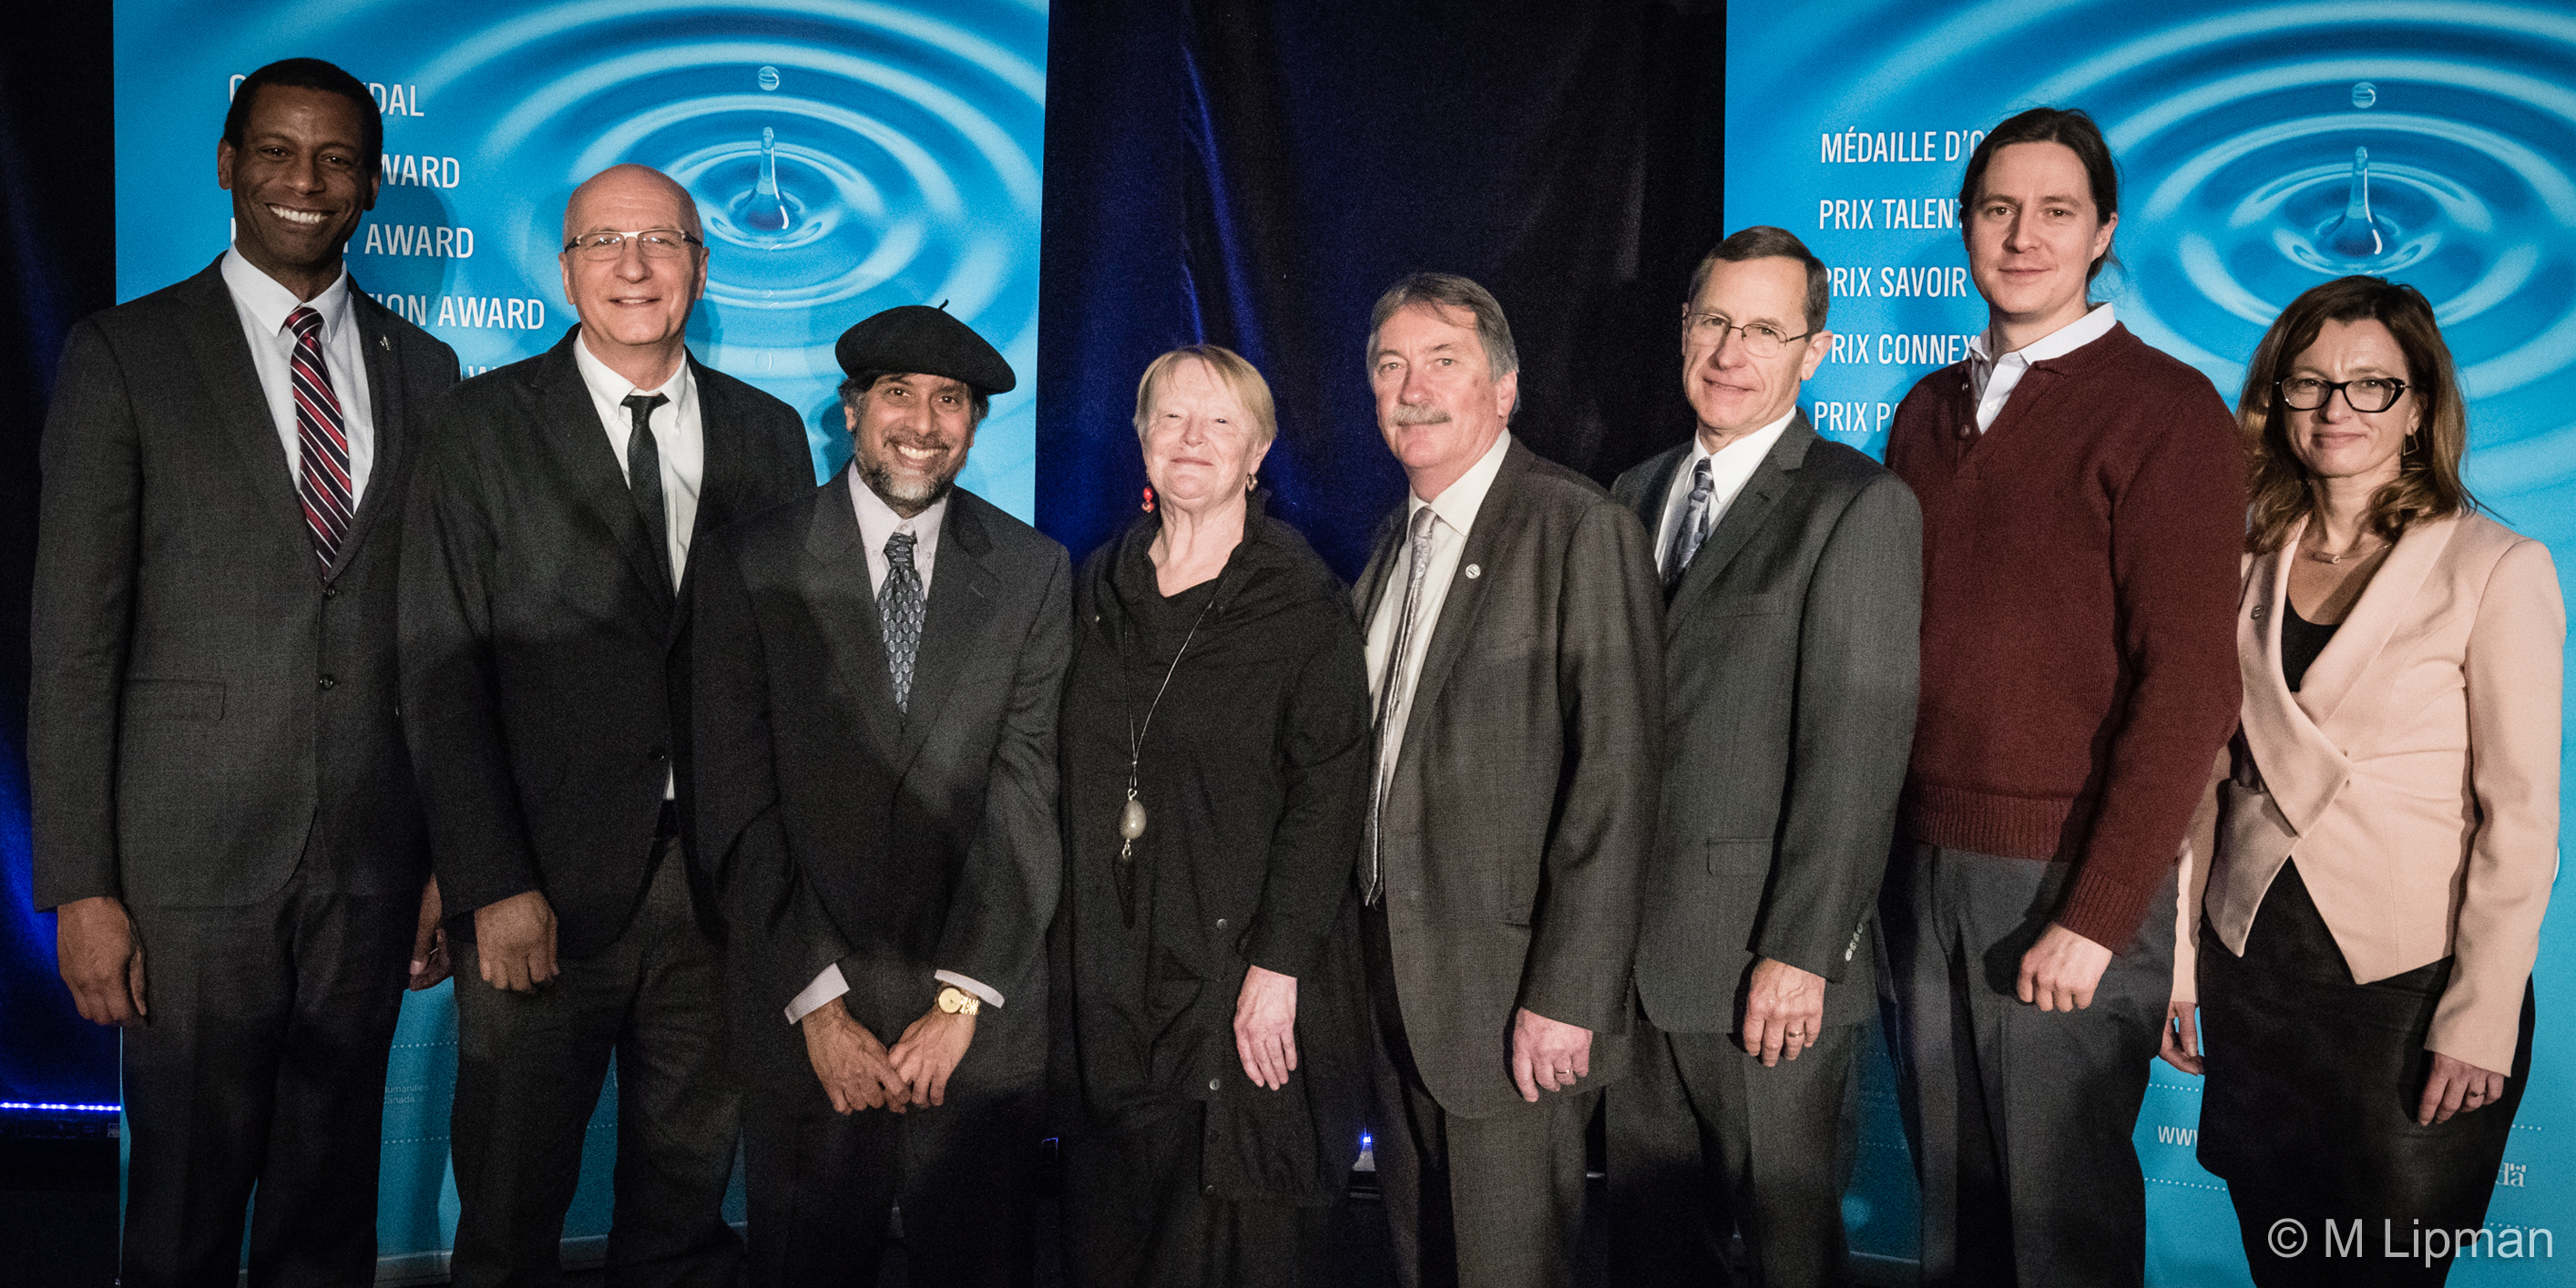 Impact Award Winners with Greg Fergus, Ted Hewitt, and Dominique Bérubé